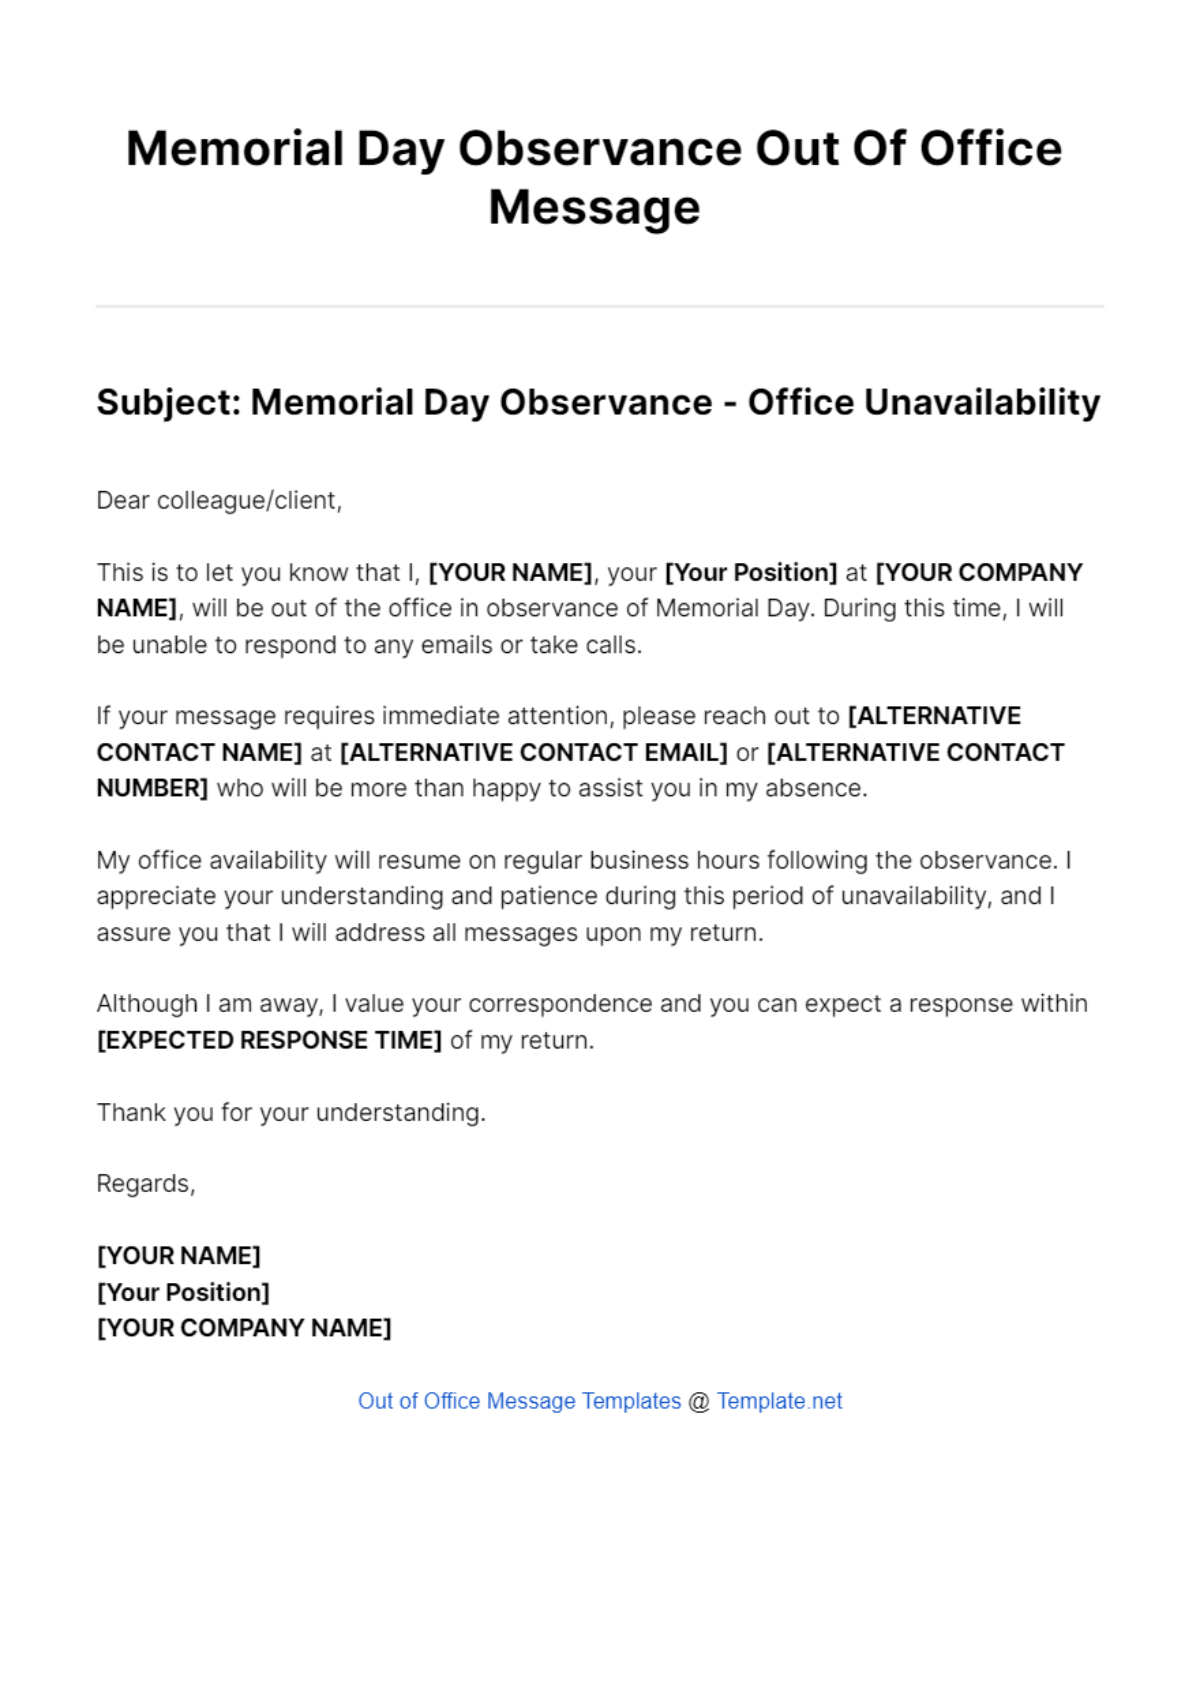 Memorial Day Observance Out Of Office Message Template